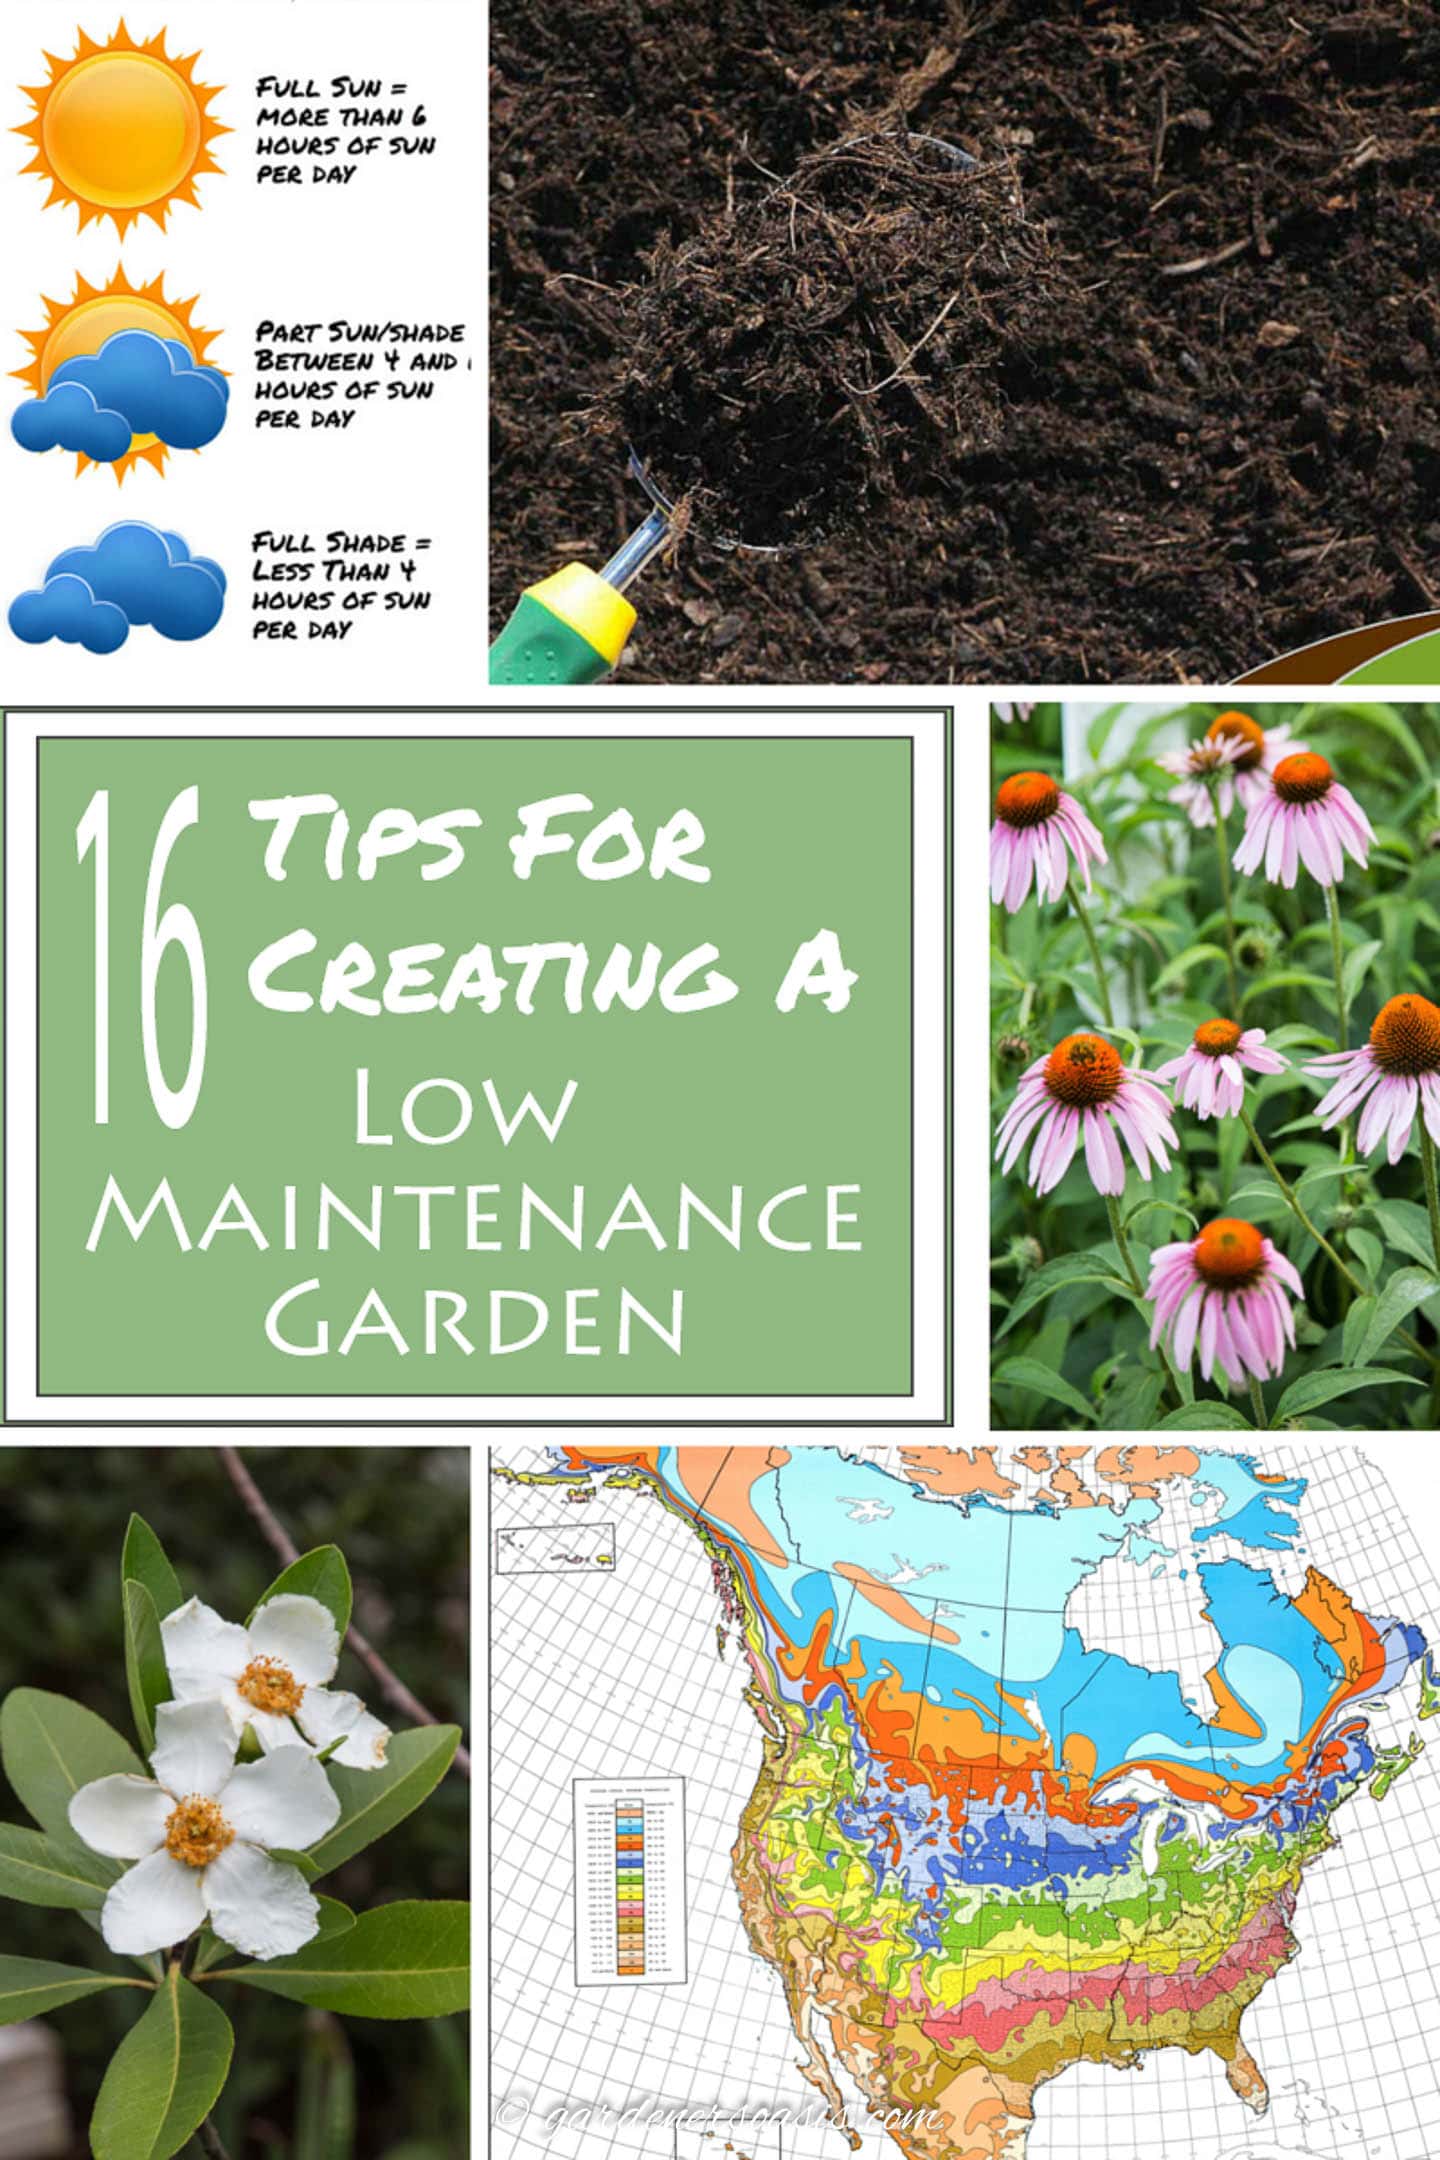 Tips for creating a low maintenance garden